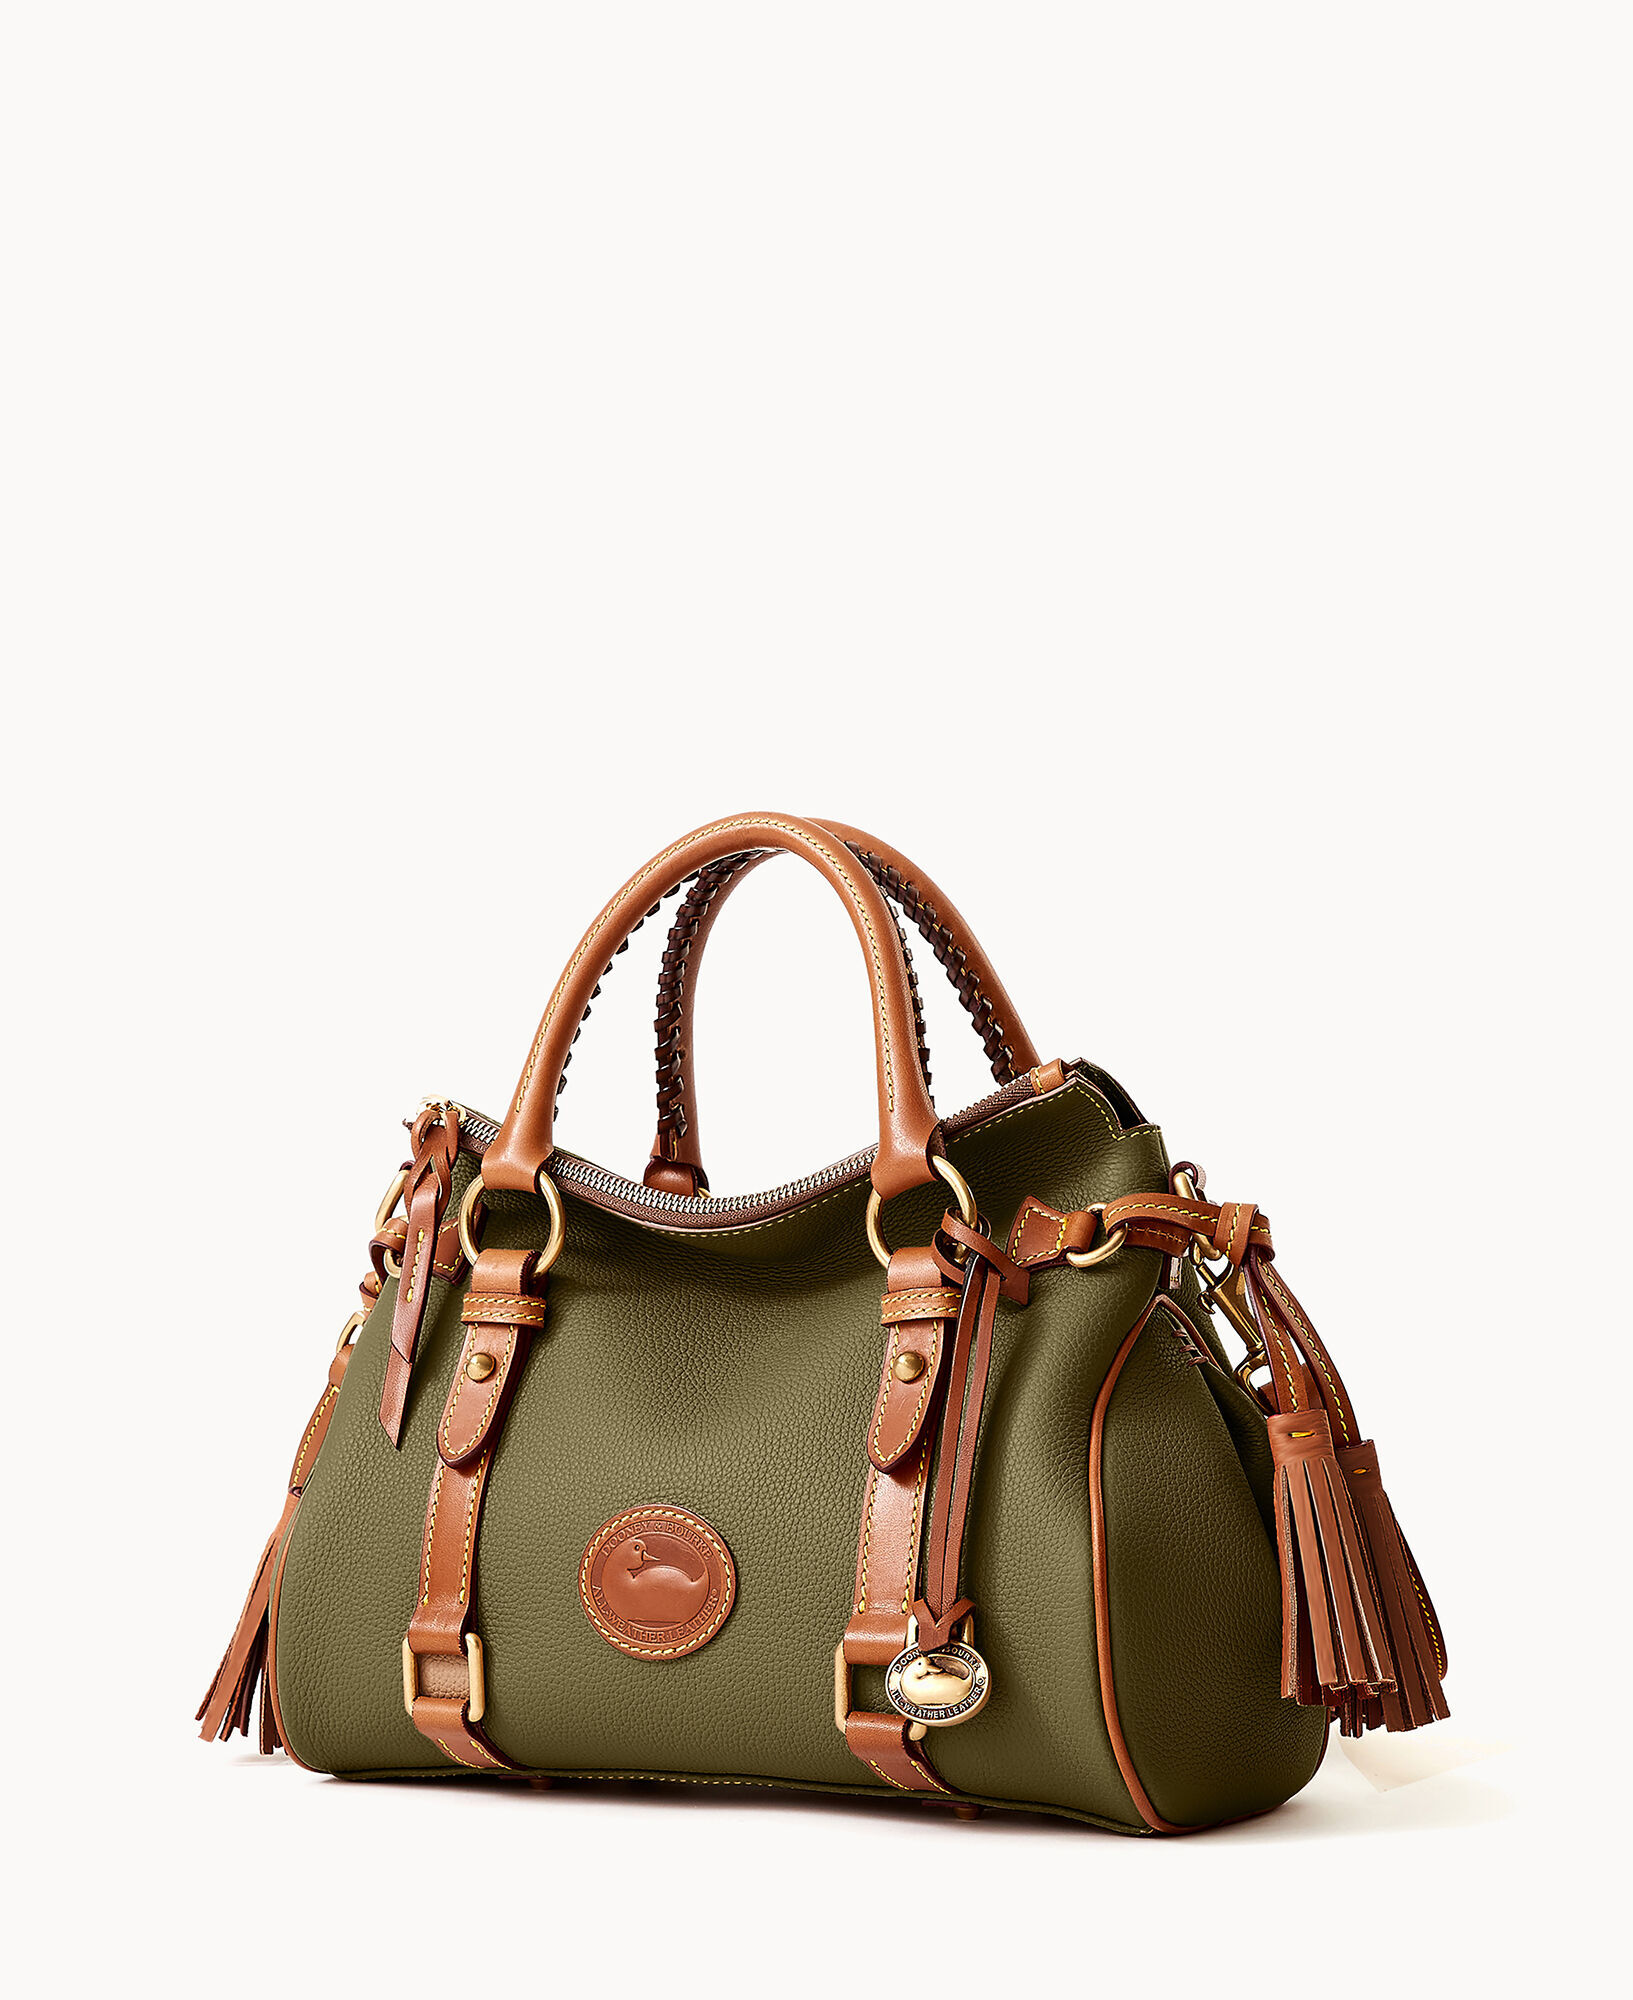 Dooney & Bourke Coupons: Up to 30% Off - November 2023